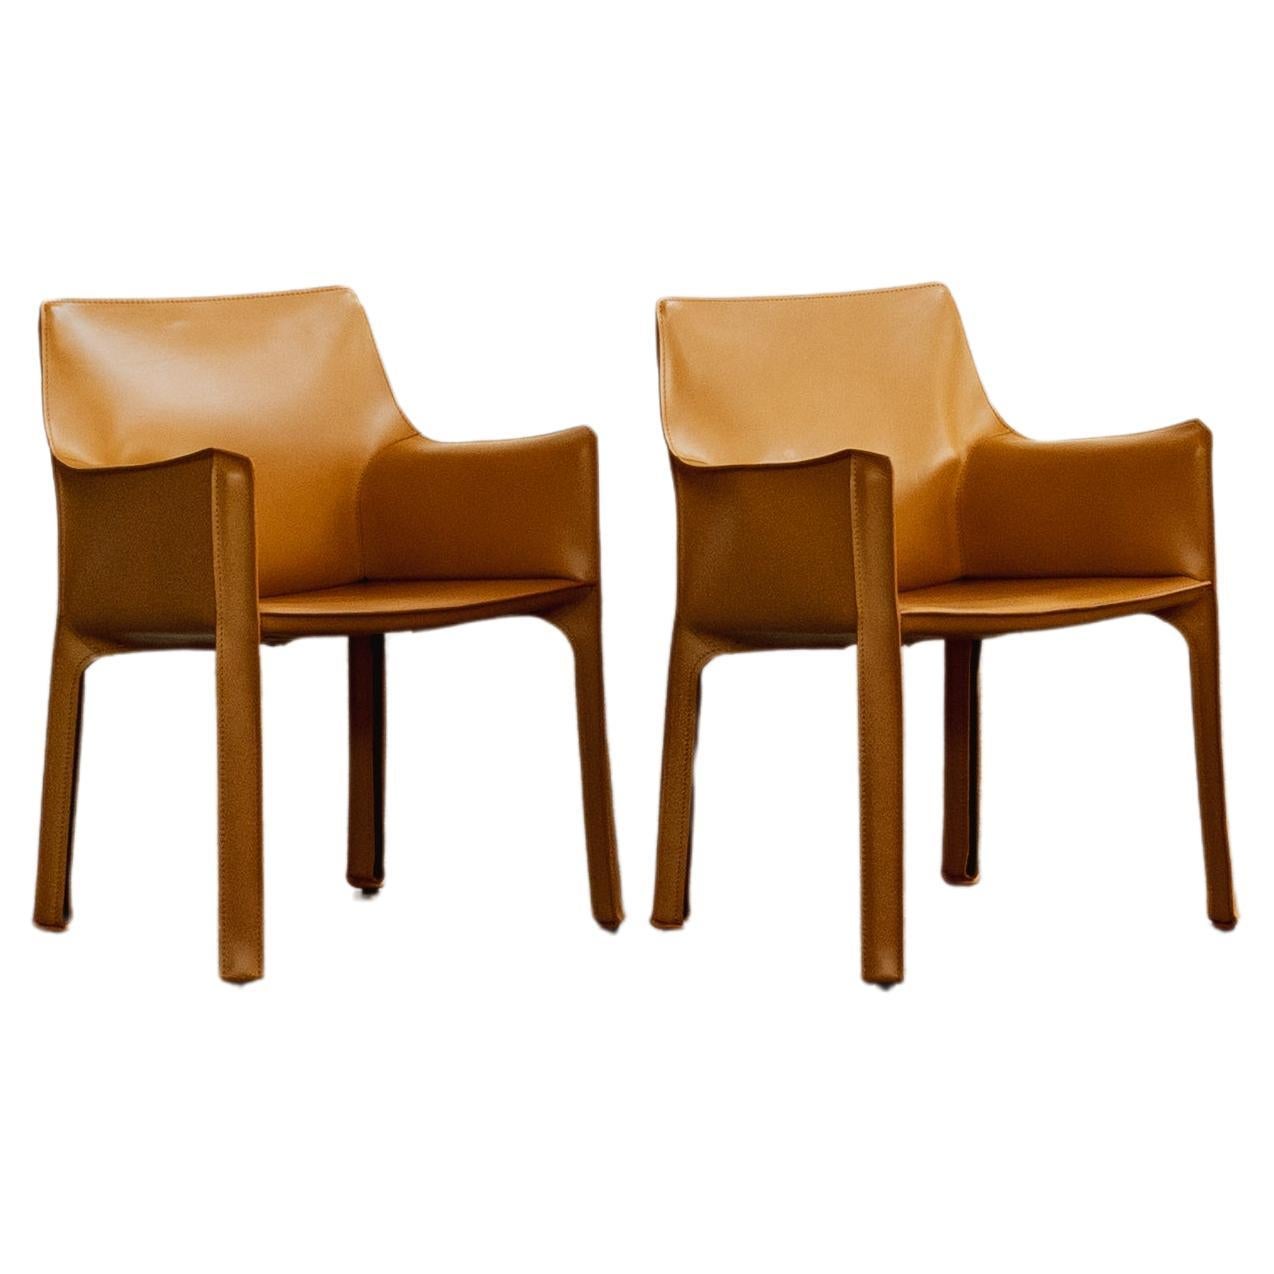 Mario Bellini "CAB 413" Dining Chairs for Cassina, 1977, Set of 2